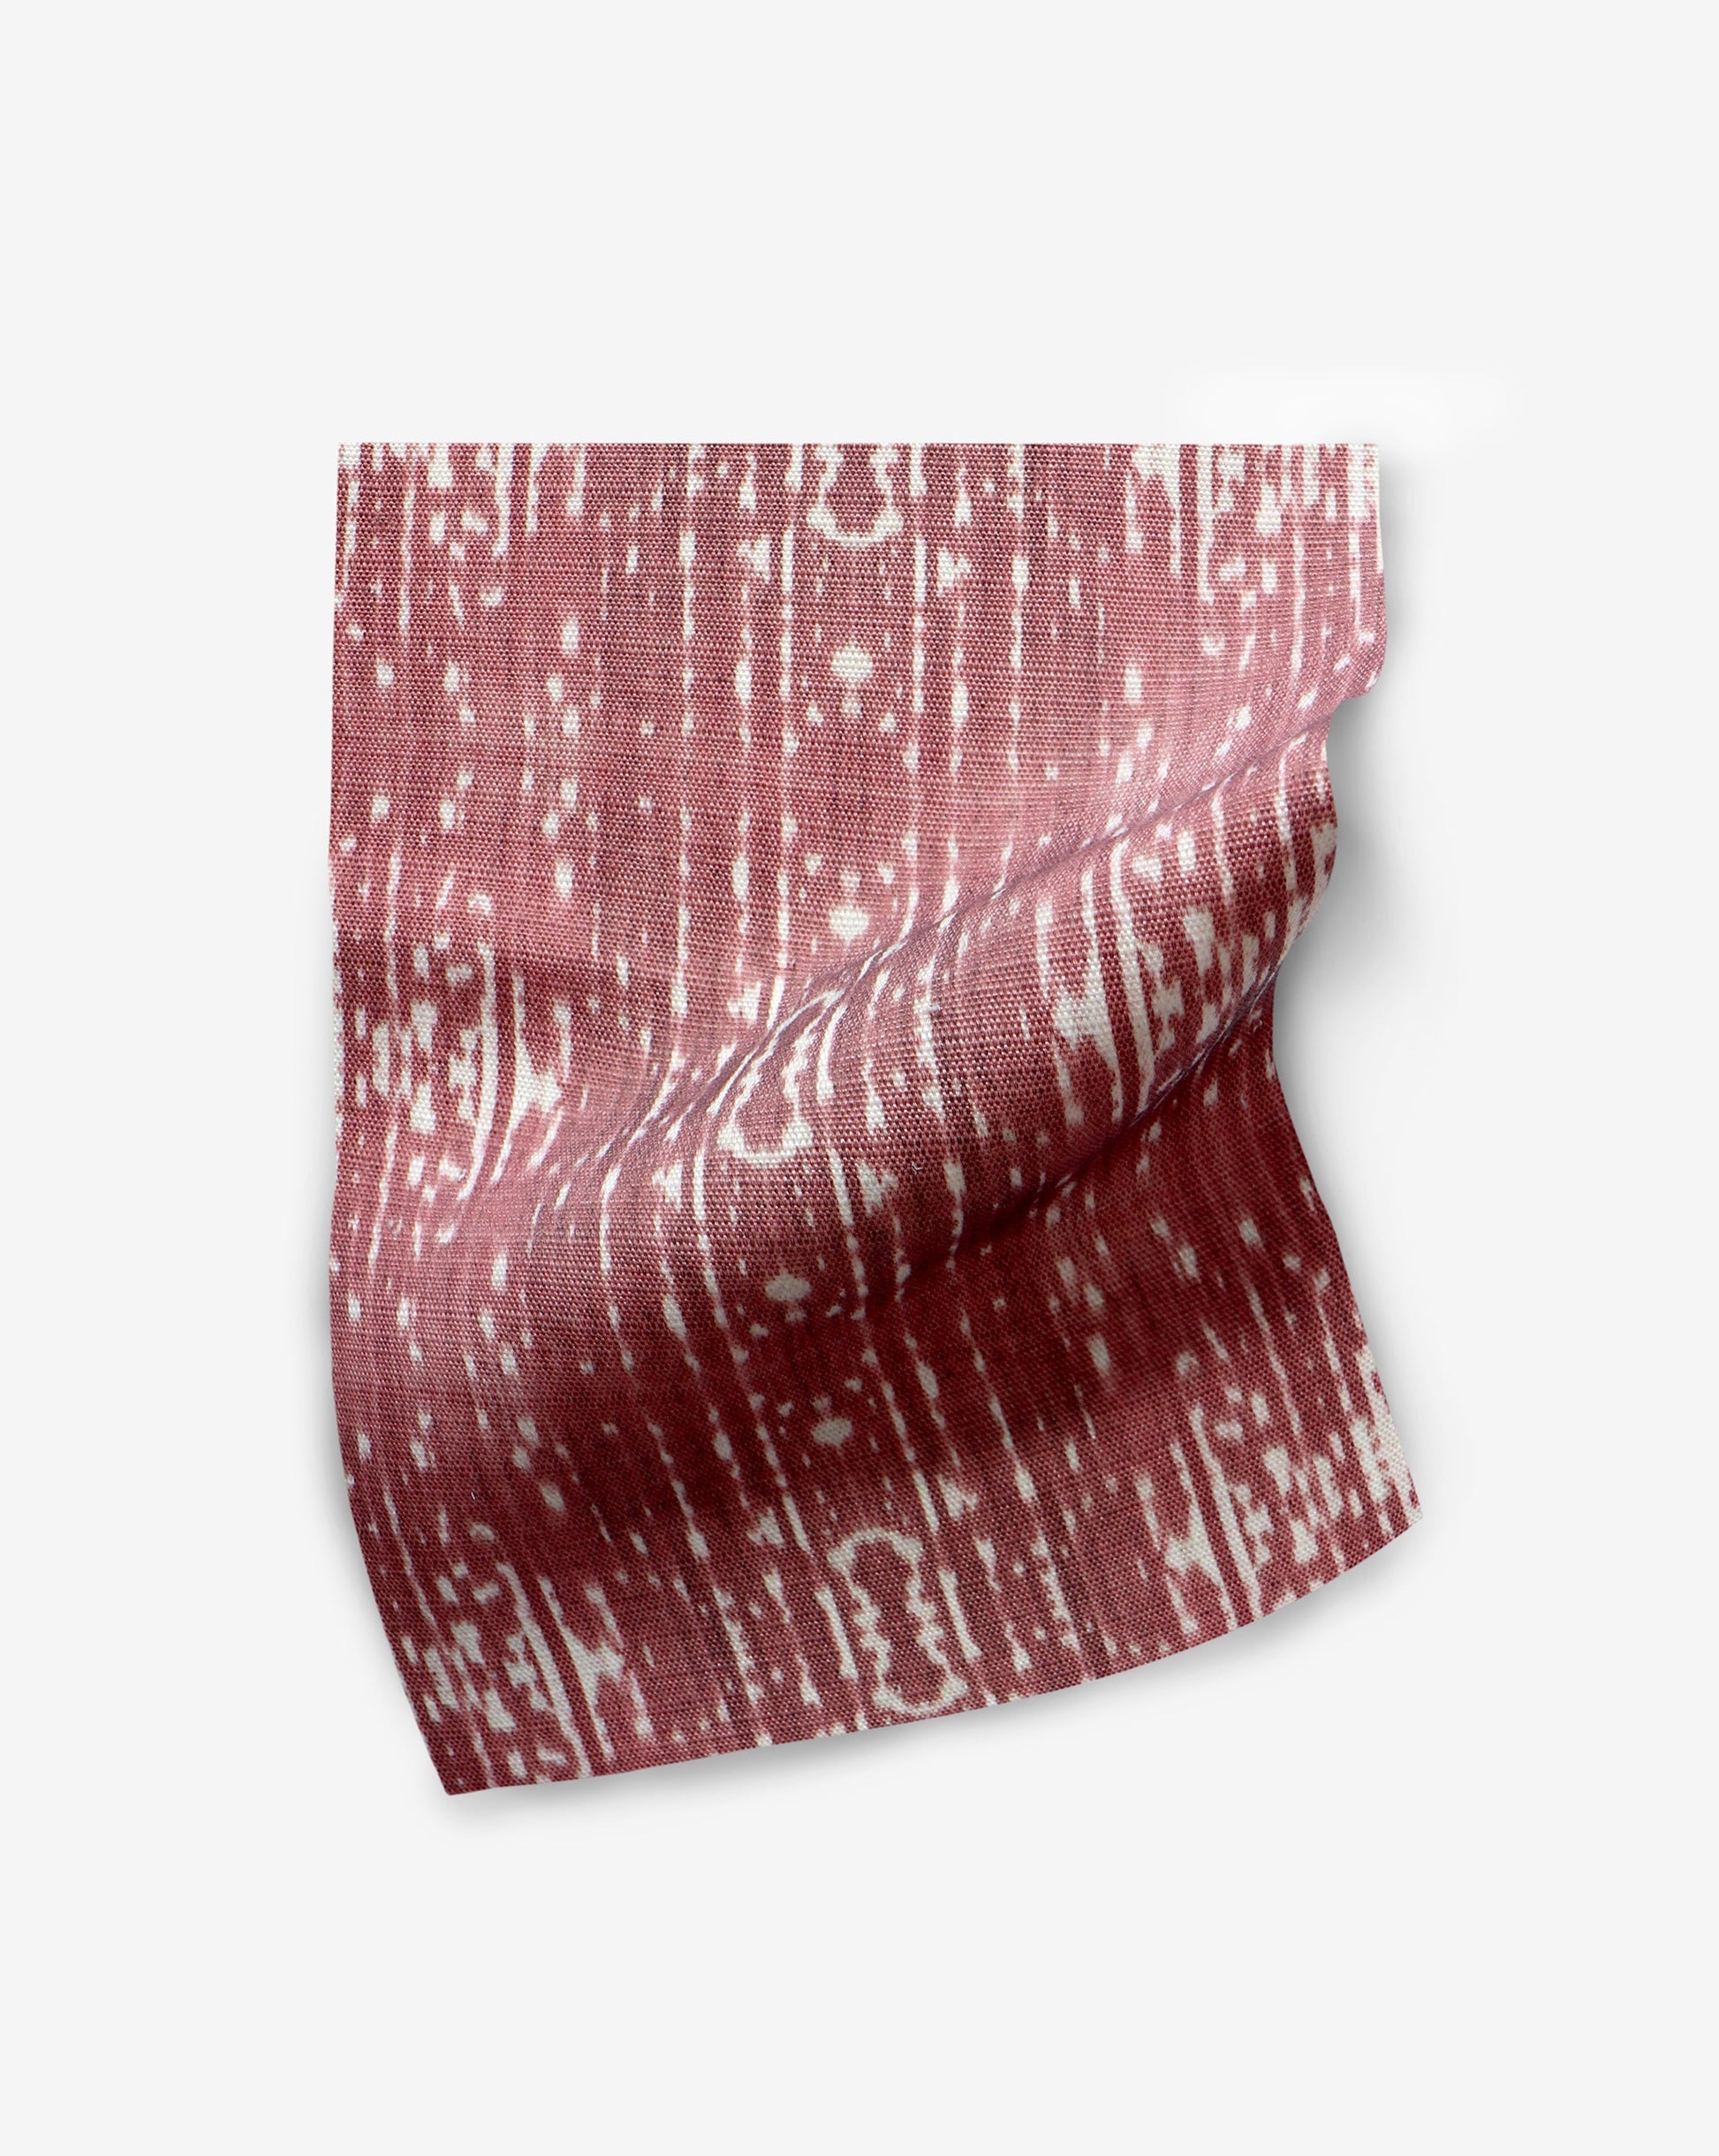 A red and white striped fabric featuring Omaha Kinship Performance Fabric Morinda Ikat on a white background